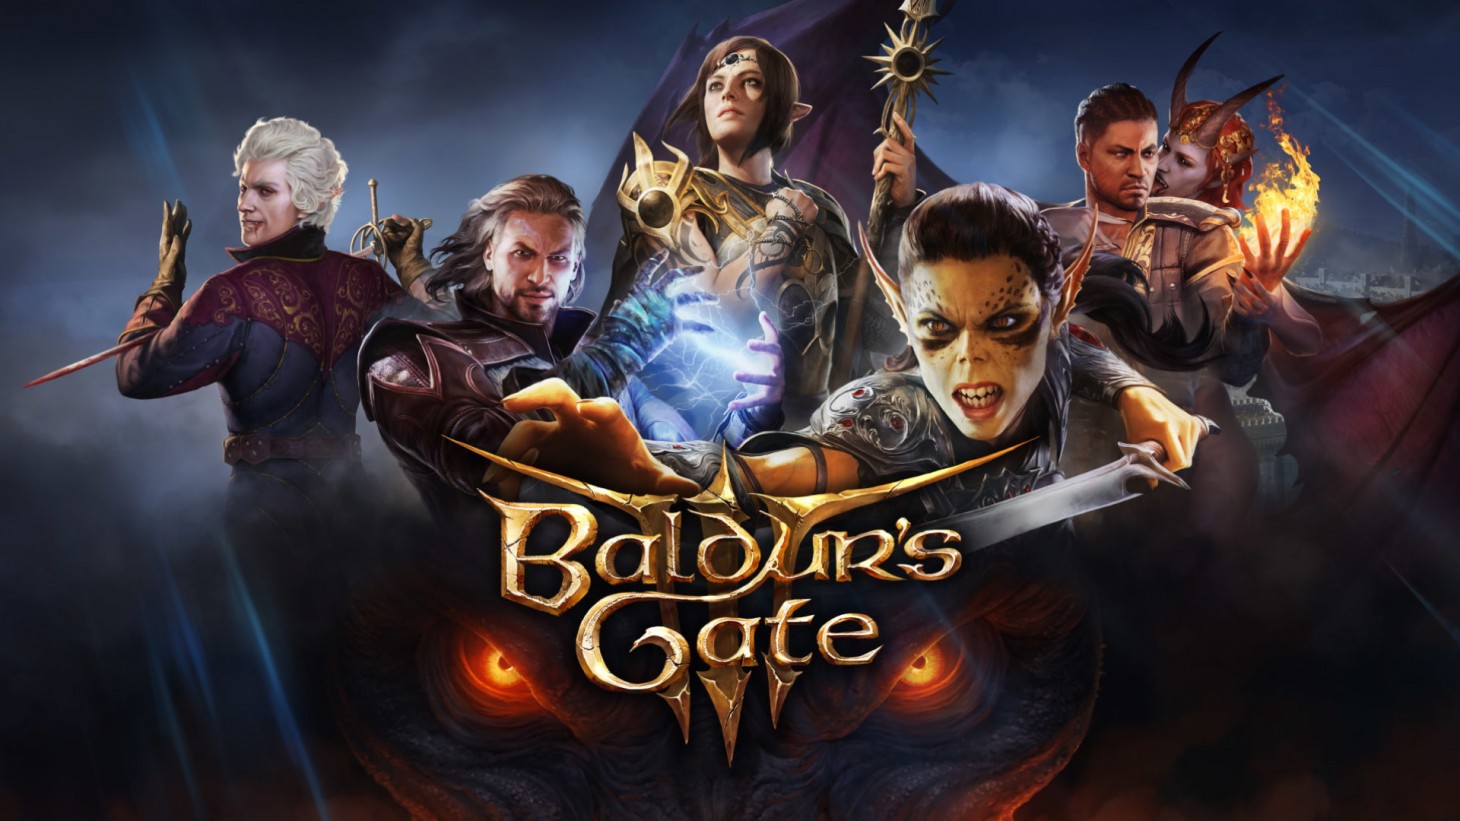 The Game Awards 2023 Nominees Over Taken By Baldur's Gate 3 and